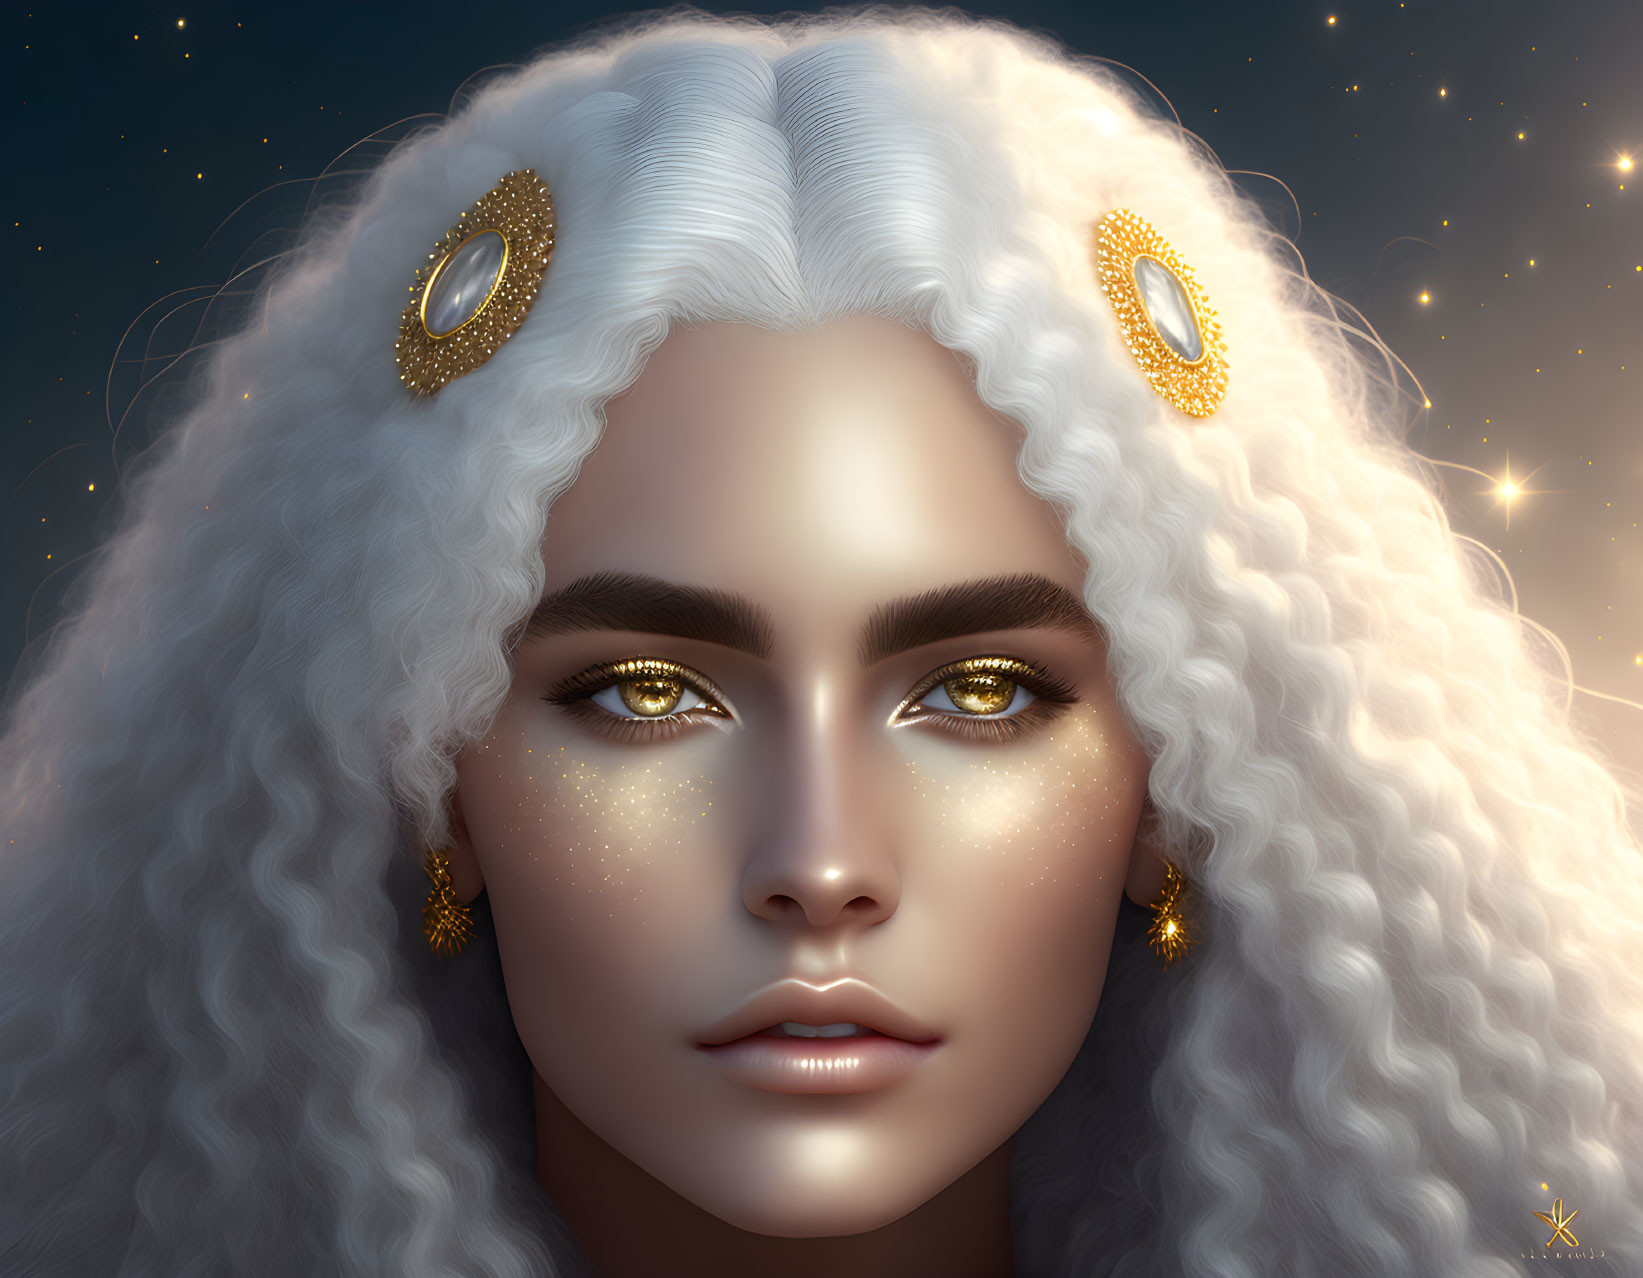 Digital portrait of person with pale skin, white curly hair, gold eyes, star-like freckles